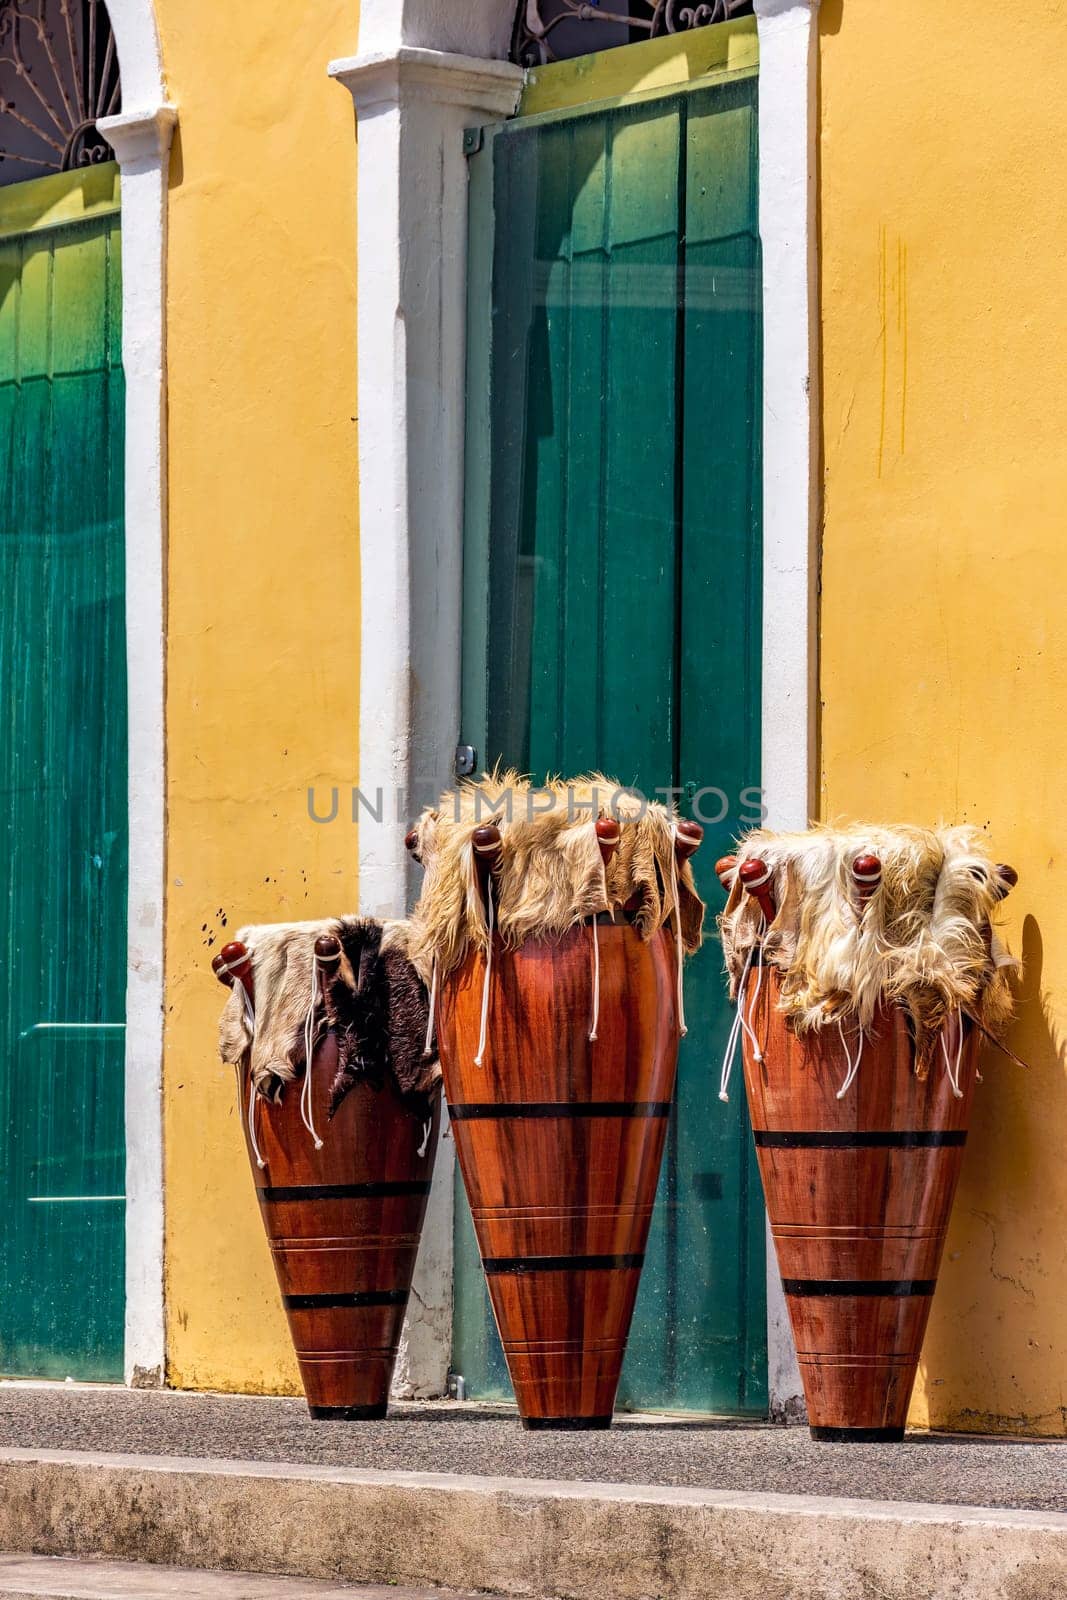 Decorated ethnic drums also called atabaques on the streets of Pelourinho district, the historic center of the city of Salvador in Bahia